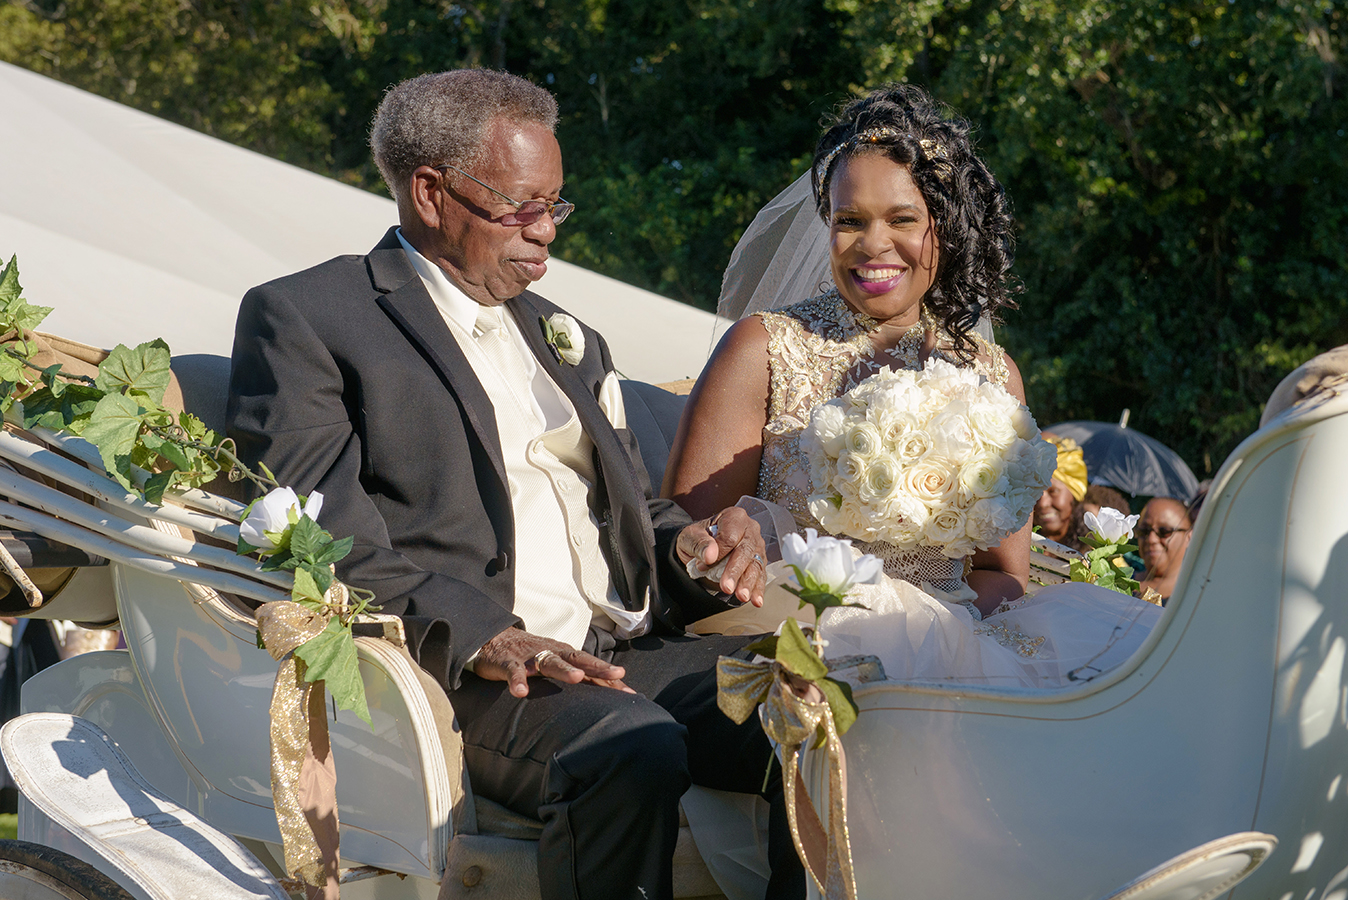 “The favorite part of my wedding day was the horse and carriage ride,” shares Doliecha.